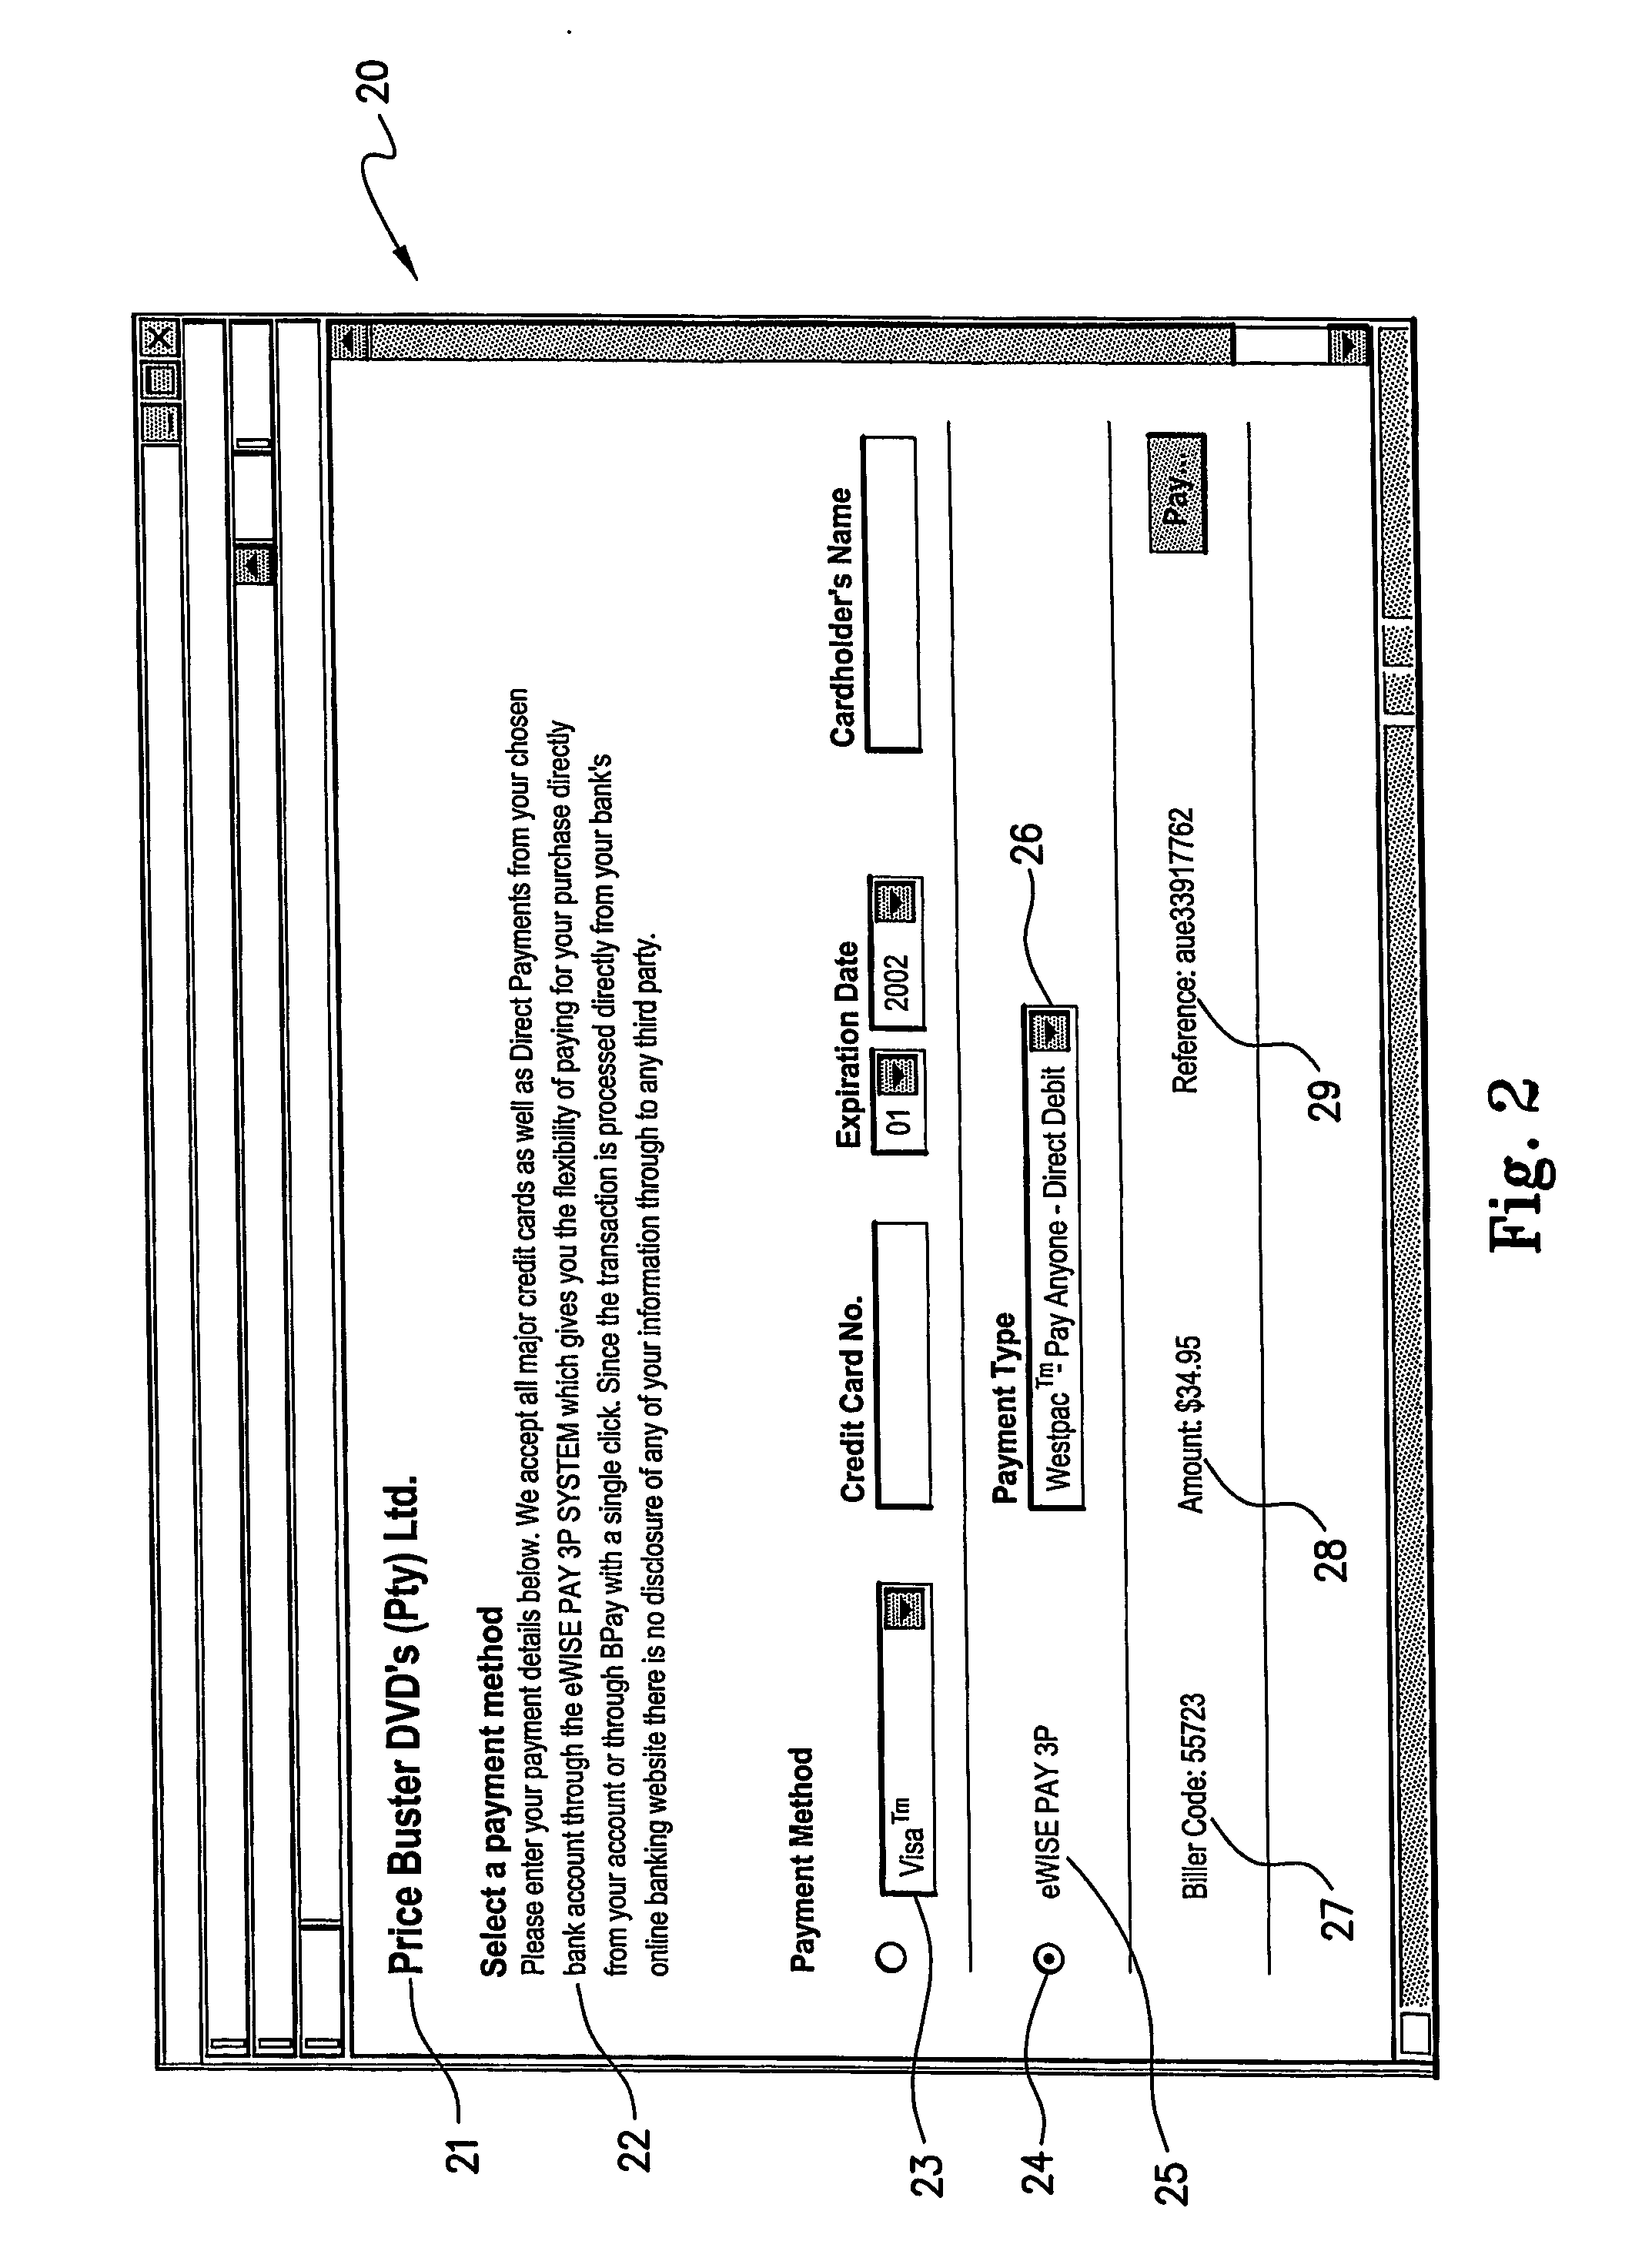 System and method for facilitating on-line payment